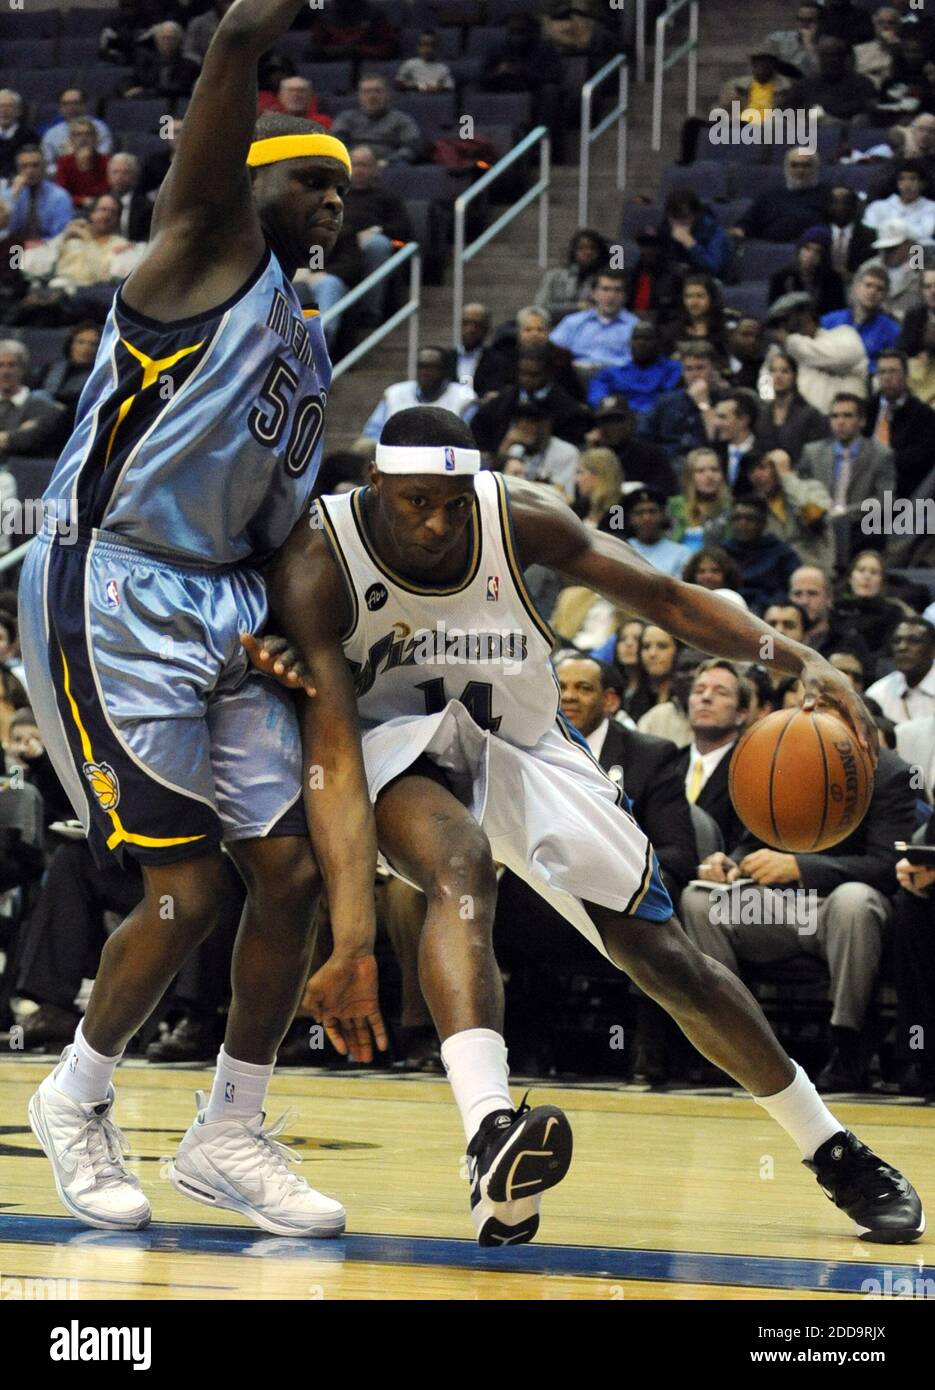 NO FILM, NO VIDEO, NO TV, NO DOCUMENTARY - The Memphis Grizzlies' Zach Randolph (50) applies a tight defense against the Washington Wizards' Al Thronton (14) during the third quarter at the Verizon Center in Washington, D.C., Wednesday, February 24, 2010. The Grizzlies defeated the Wizards, 99-94. Photo by Chuck Myers/MCT/ABACAPRESS.COM Stock Photo